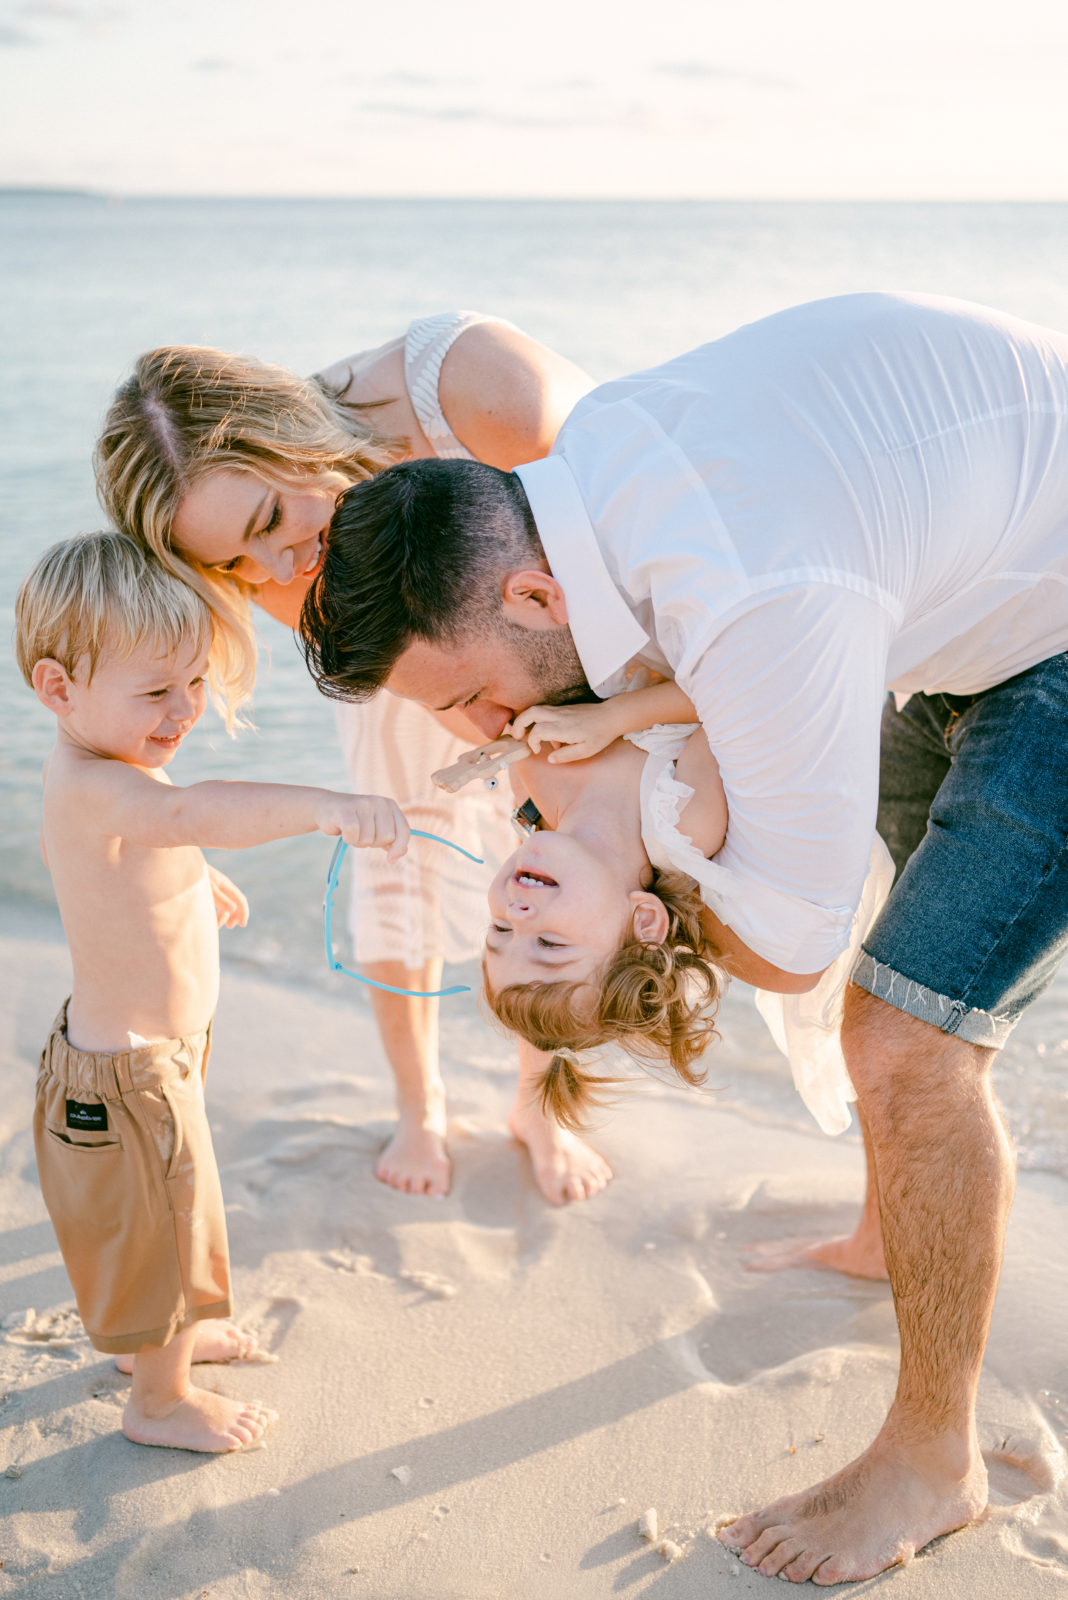 Dad is tickling his daughter upside down on the beach, family having fun